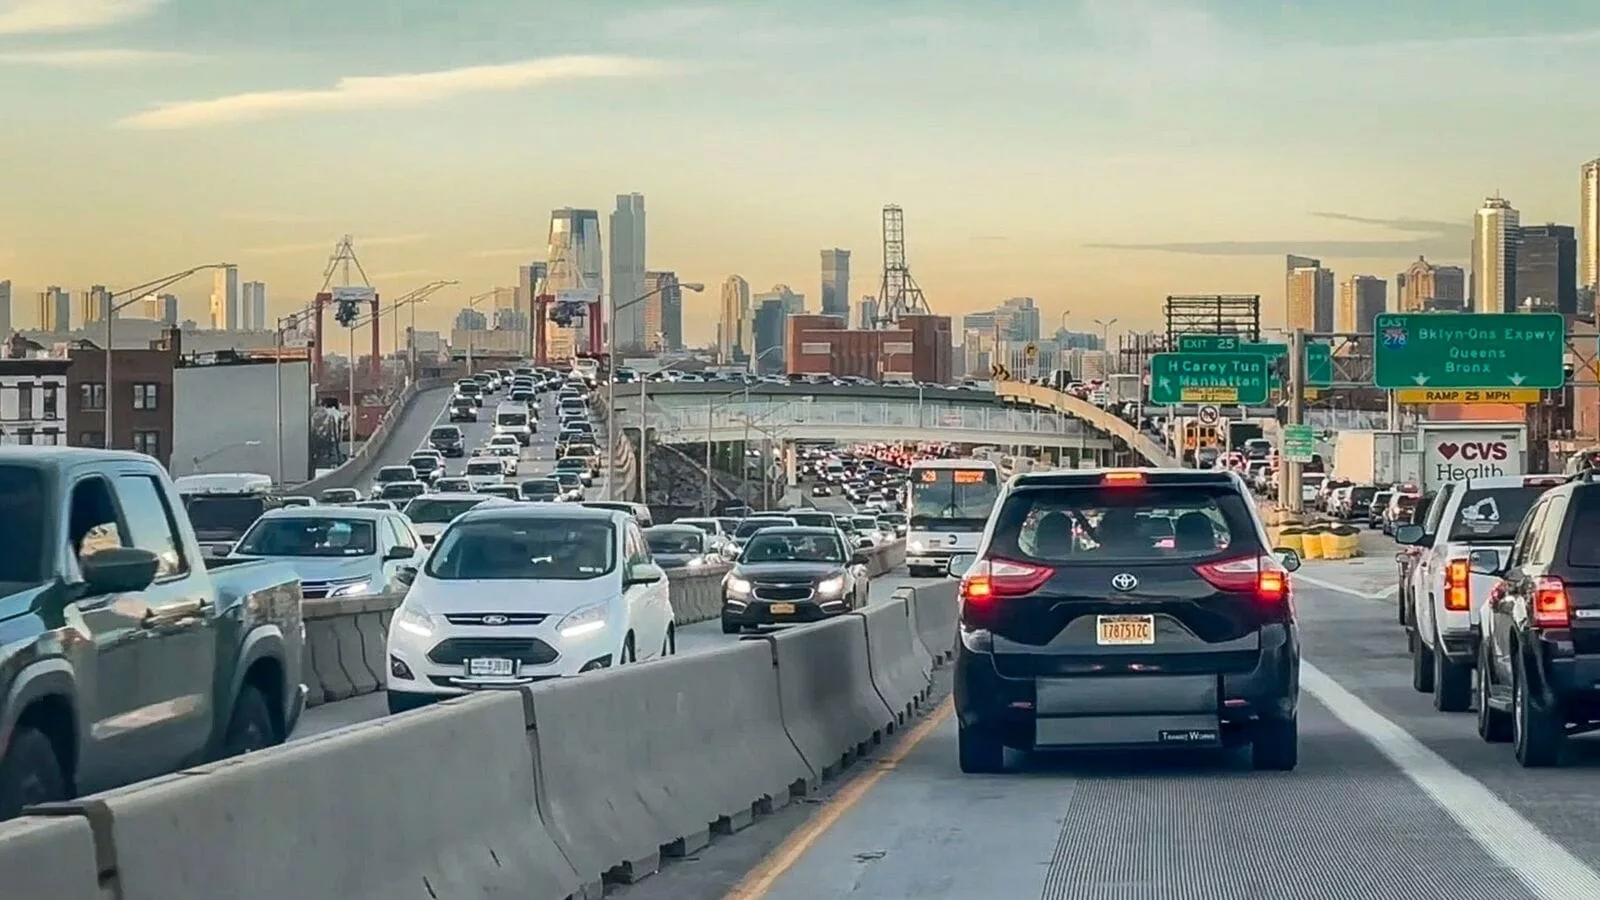 New York cops often cause traffic jams intentionally. But there's a noble reason